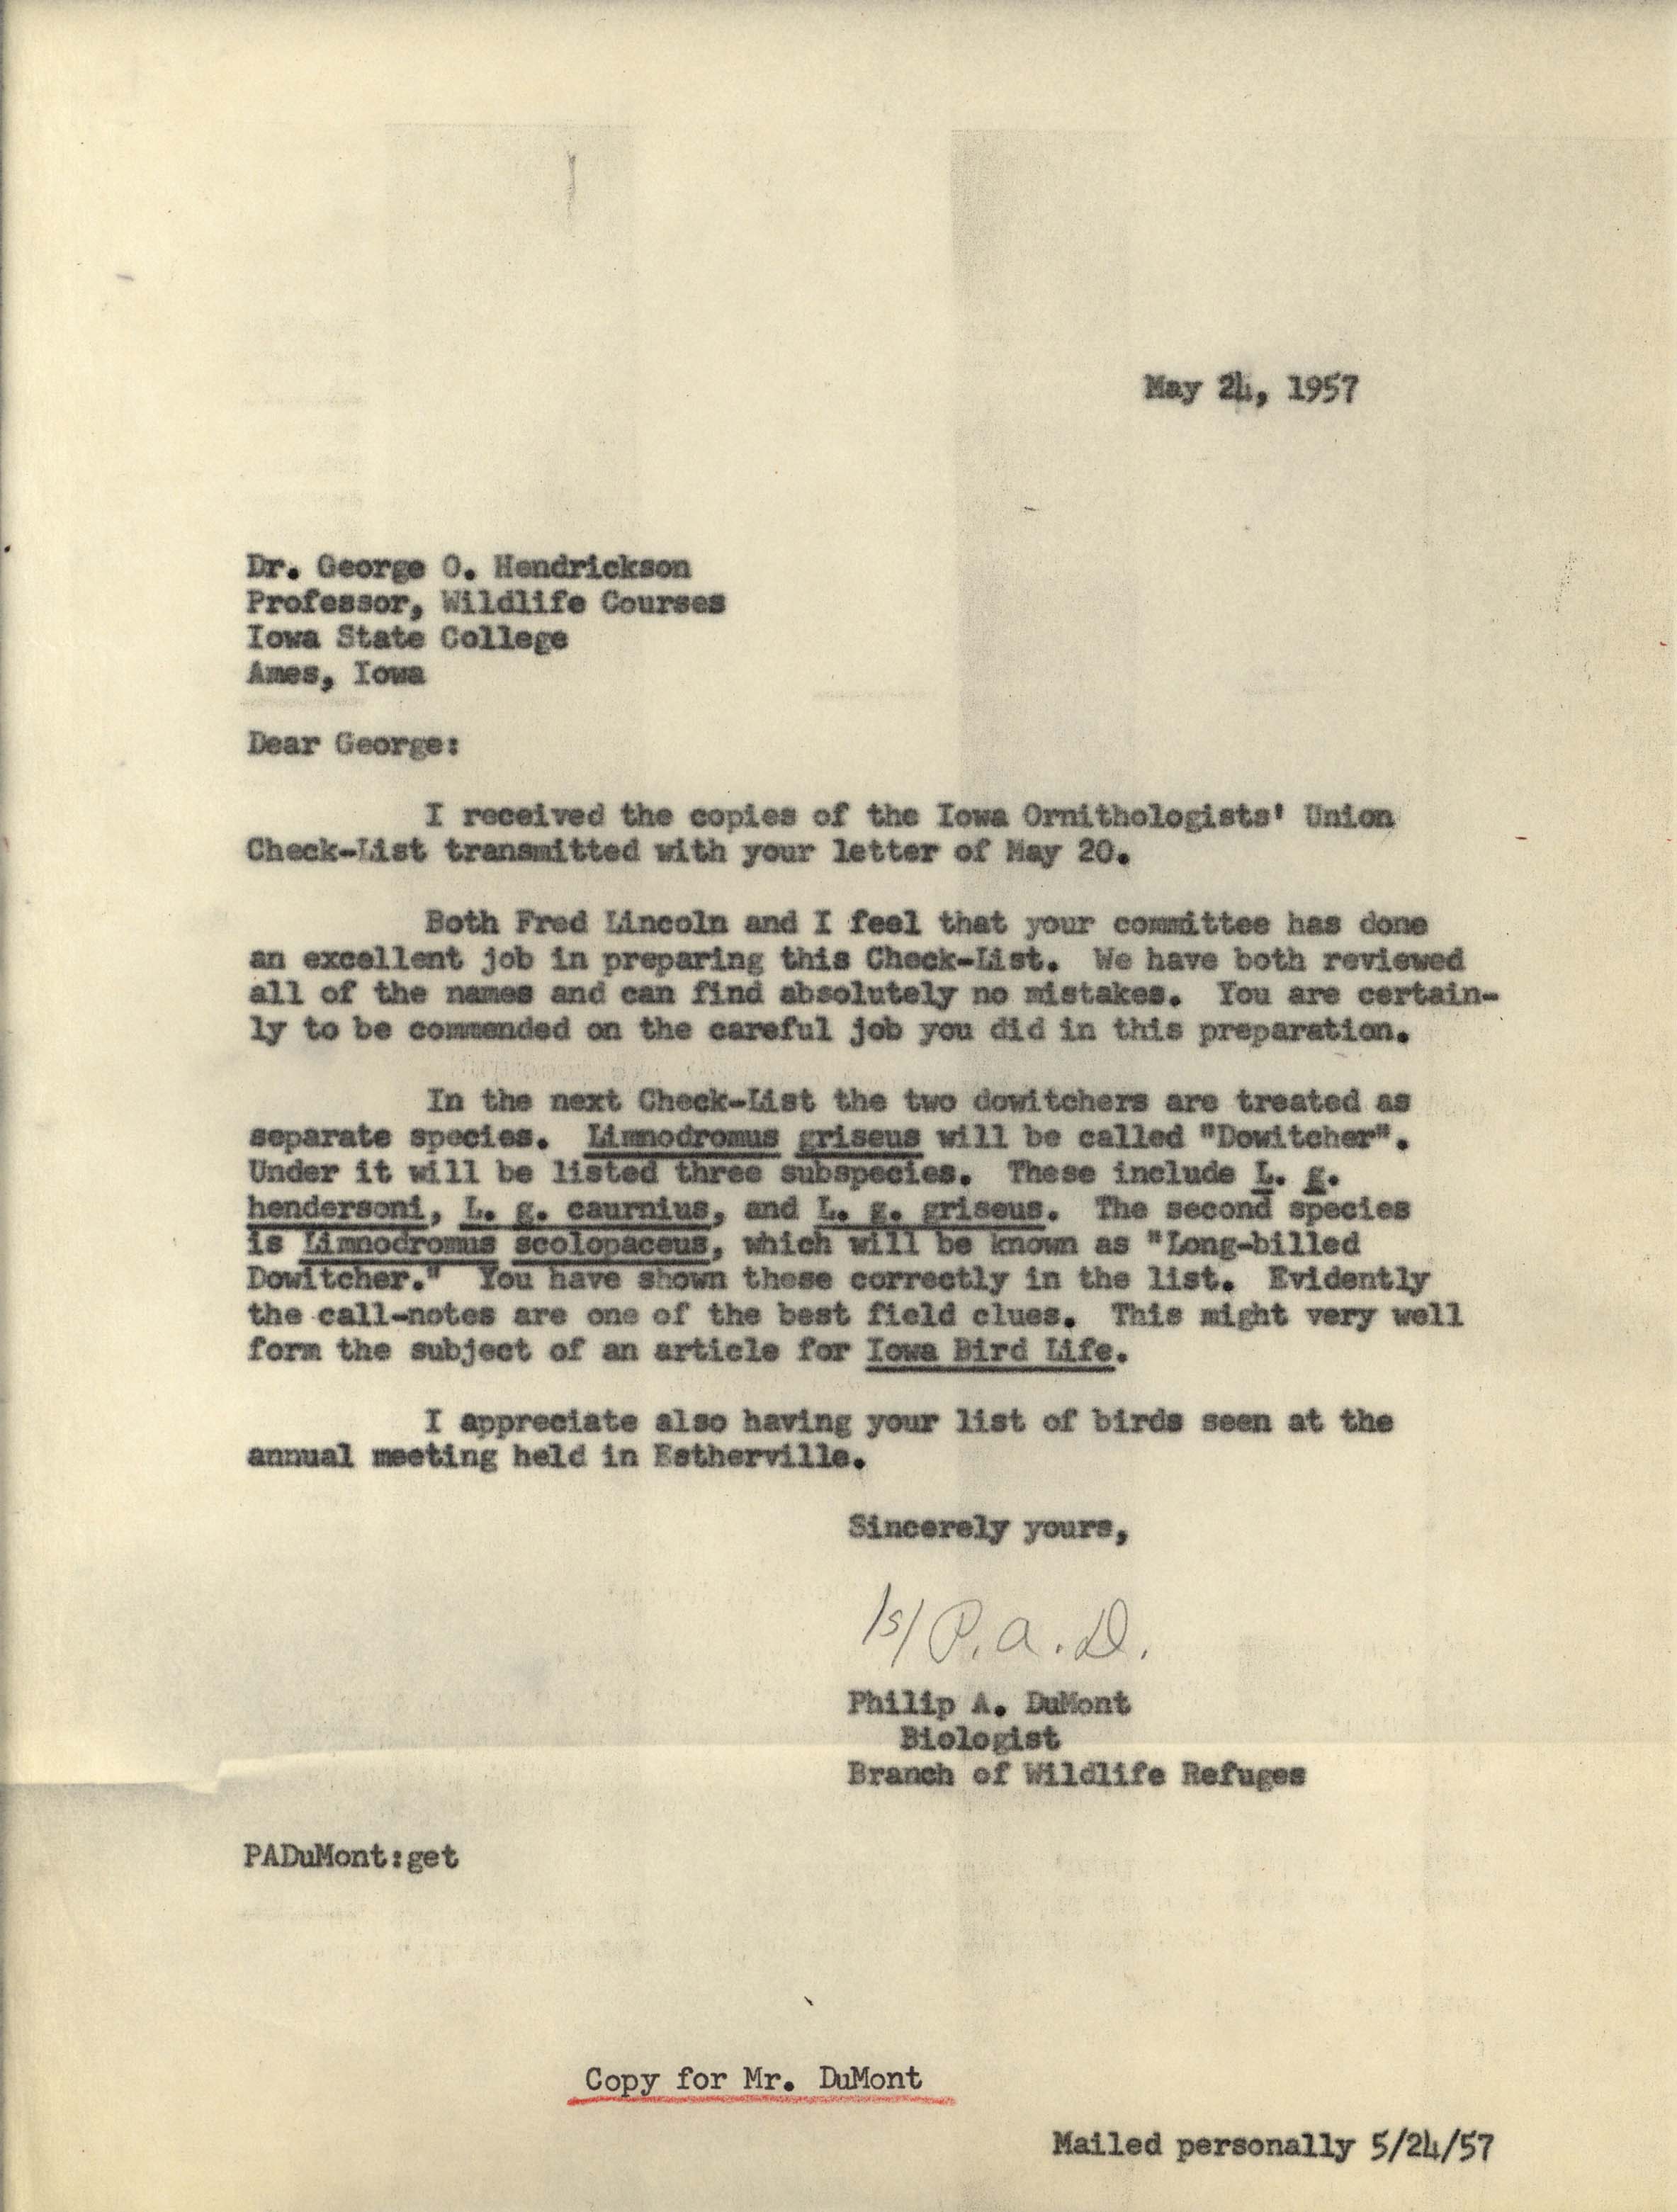 Philip DuMont letter to George Hendrickson regarding the revised Iowa Ornithologists' Union Check-list, May 24, 1957